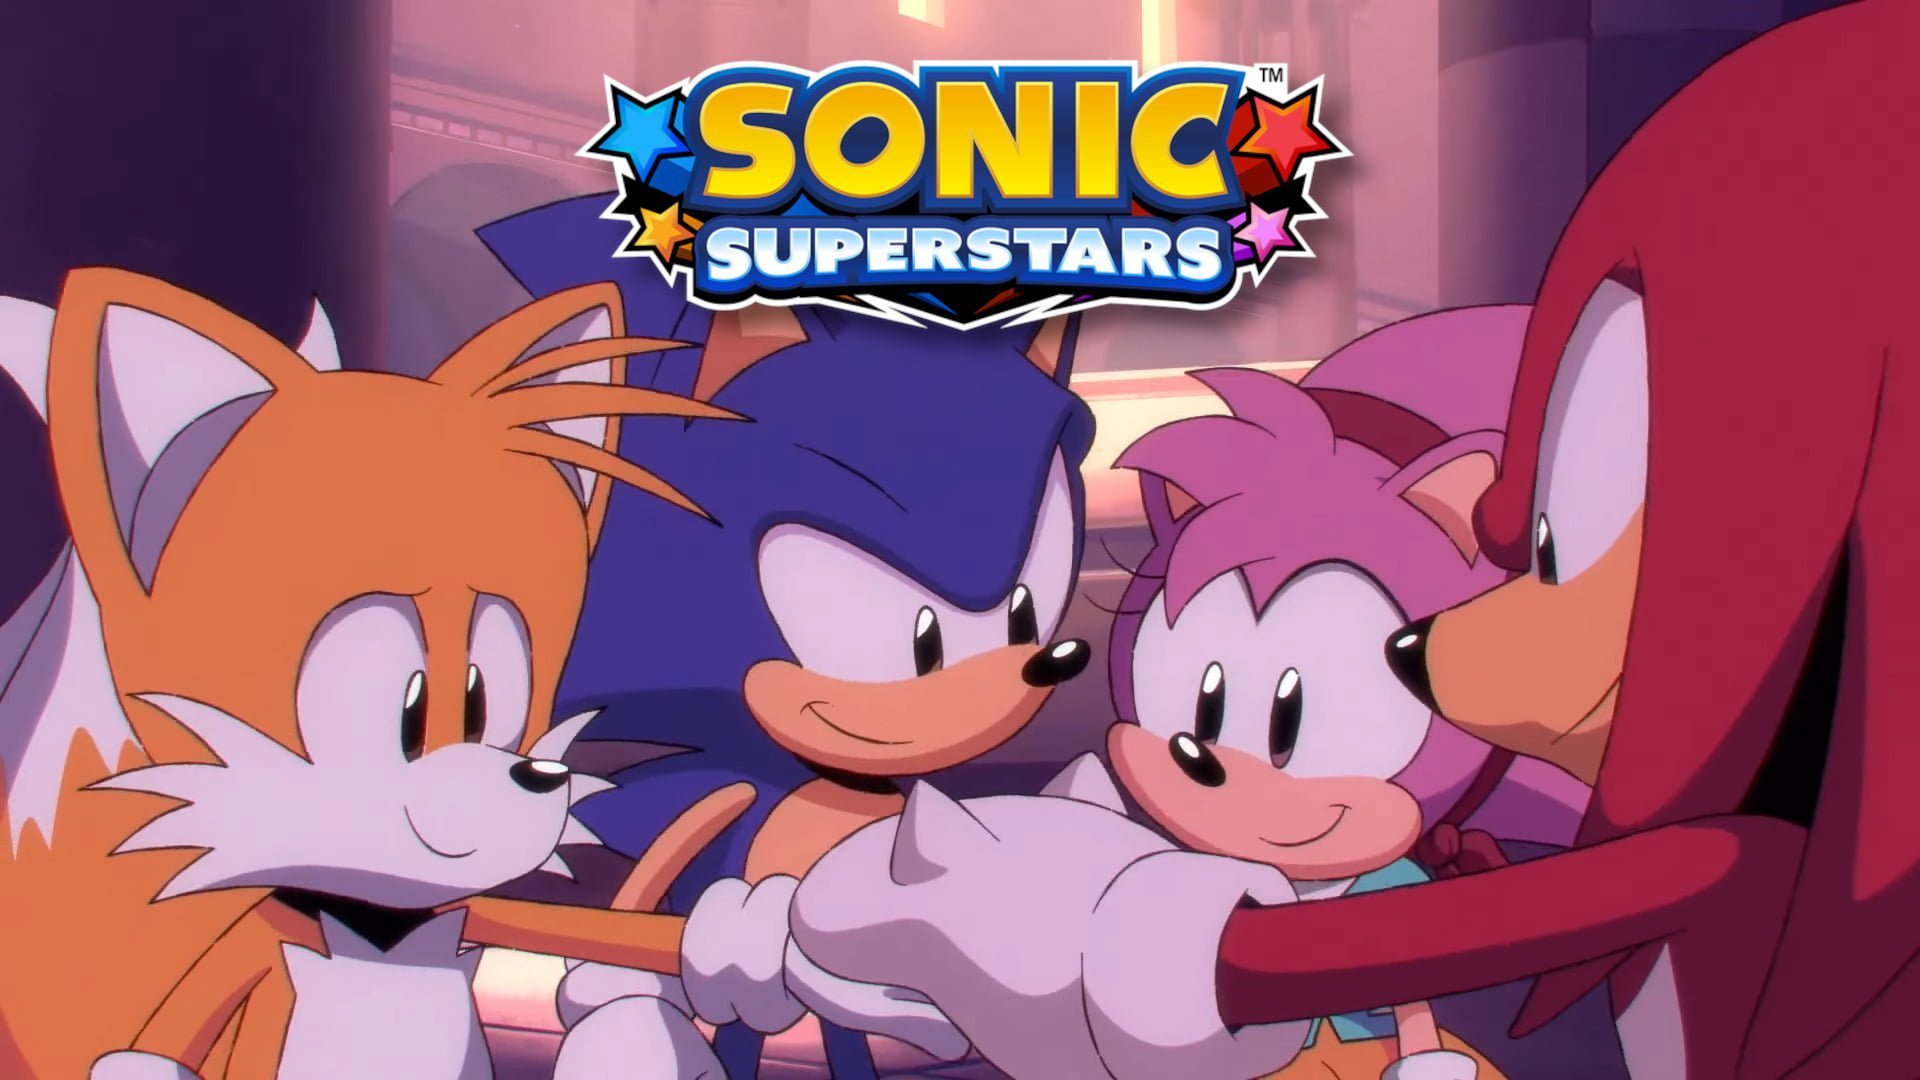 Are Sonic Superstars' PHYSICS the Same as Sonic Mania's? 